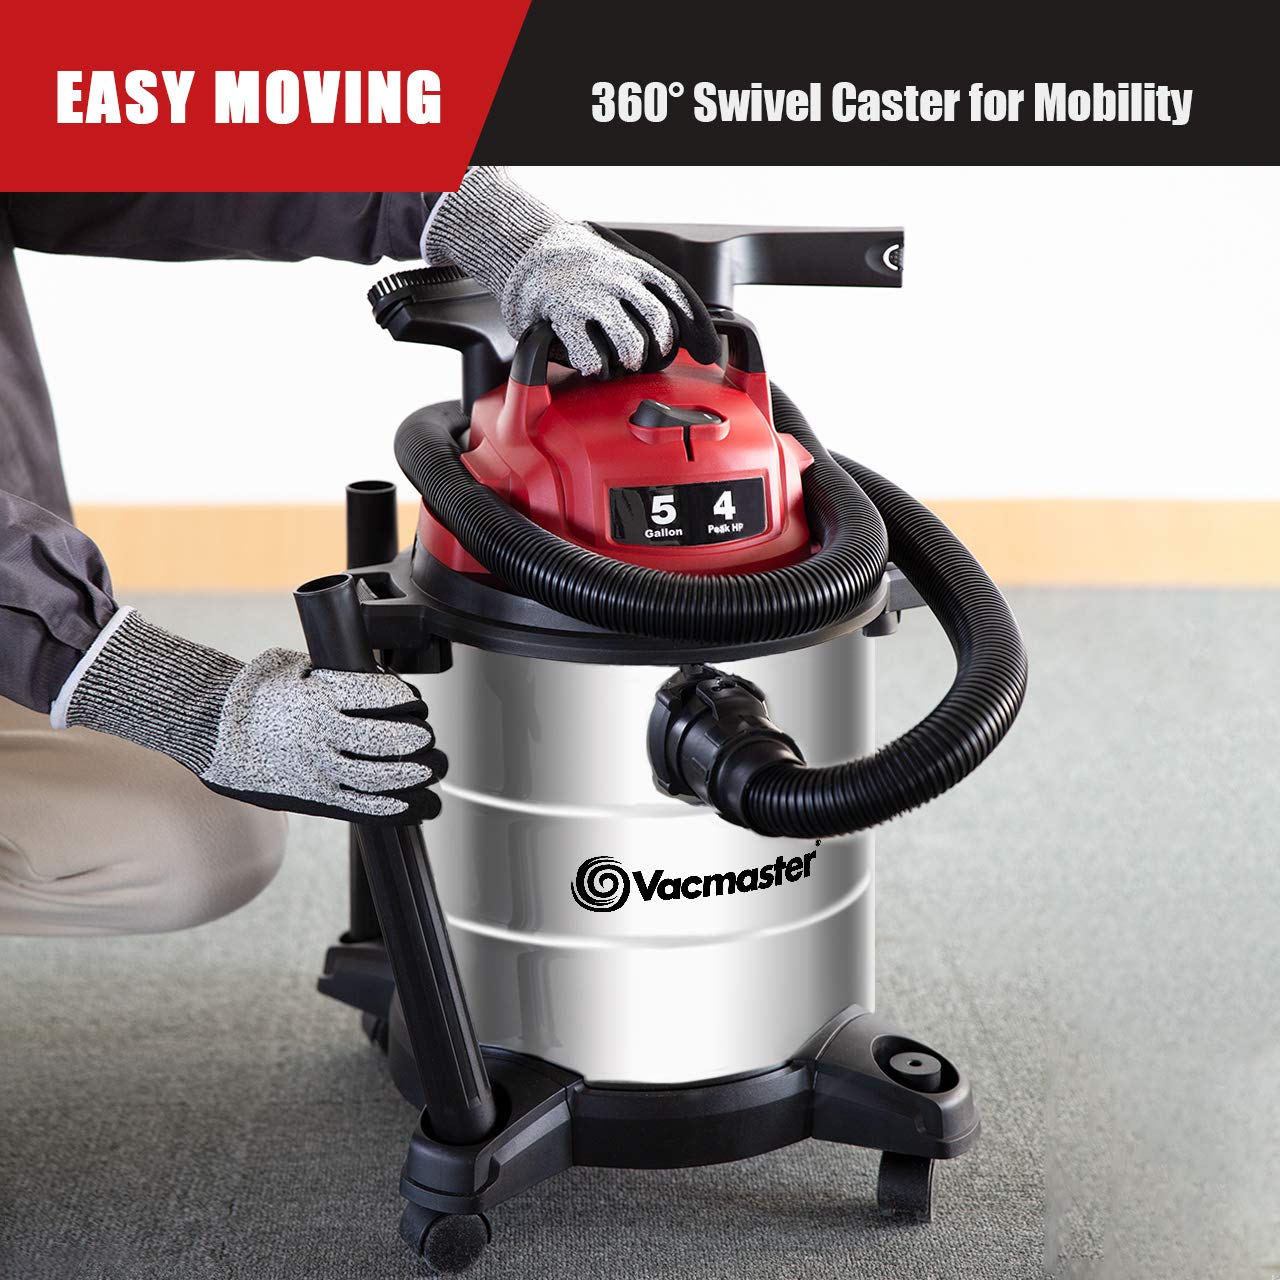 Vacmaster Red Edition VOC508S 1101 Stainless Steel Wet Dry Shop Vacuum 5 Gallon 4 Peak HP 1-1/4 inch Hose Powerful Suction with Blower Function